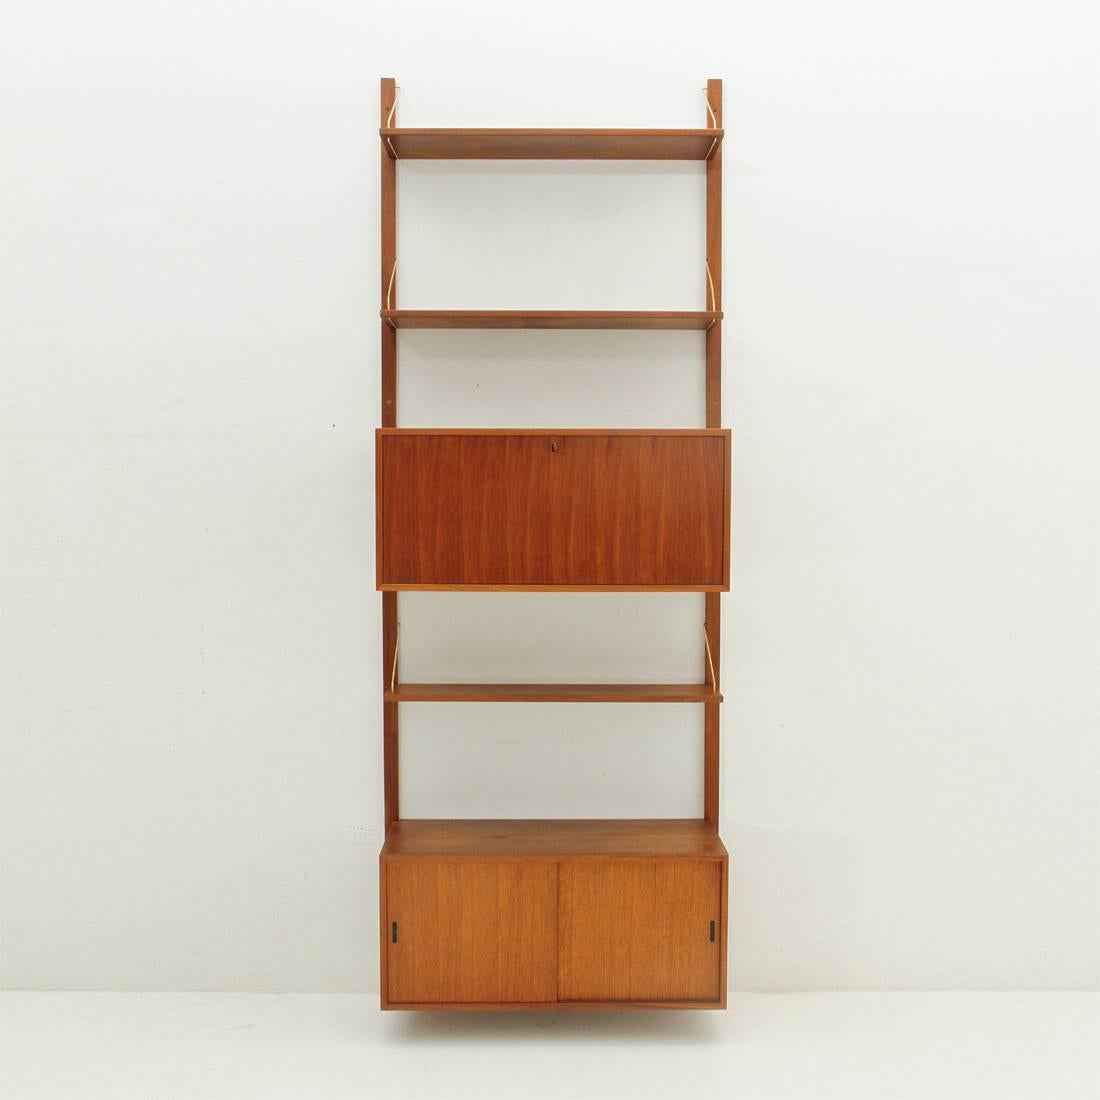 Italian library of production of the 1950s.
Wooden uprights.
Shelves in teak veneered wood.
Hooks in brass rod.
Flip compartment and compartment with doors.
Good general conditions, some signs due to normal use over time.

Dimensions: width